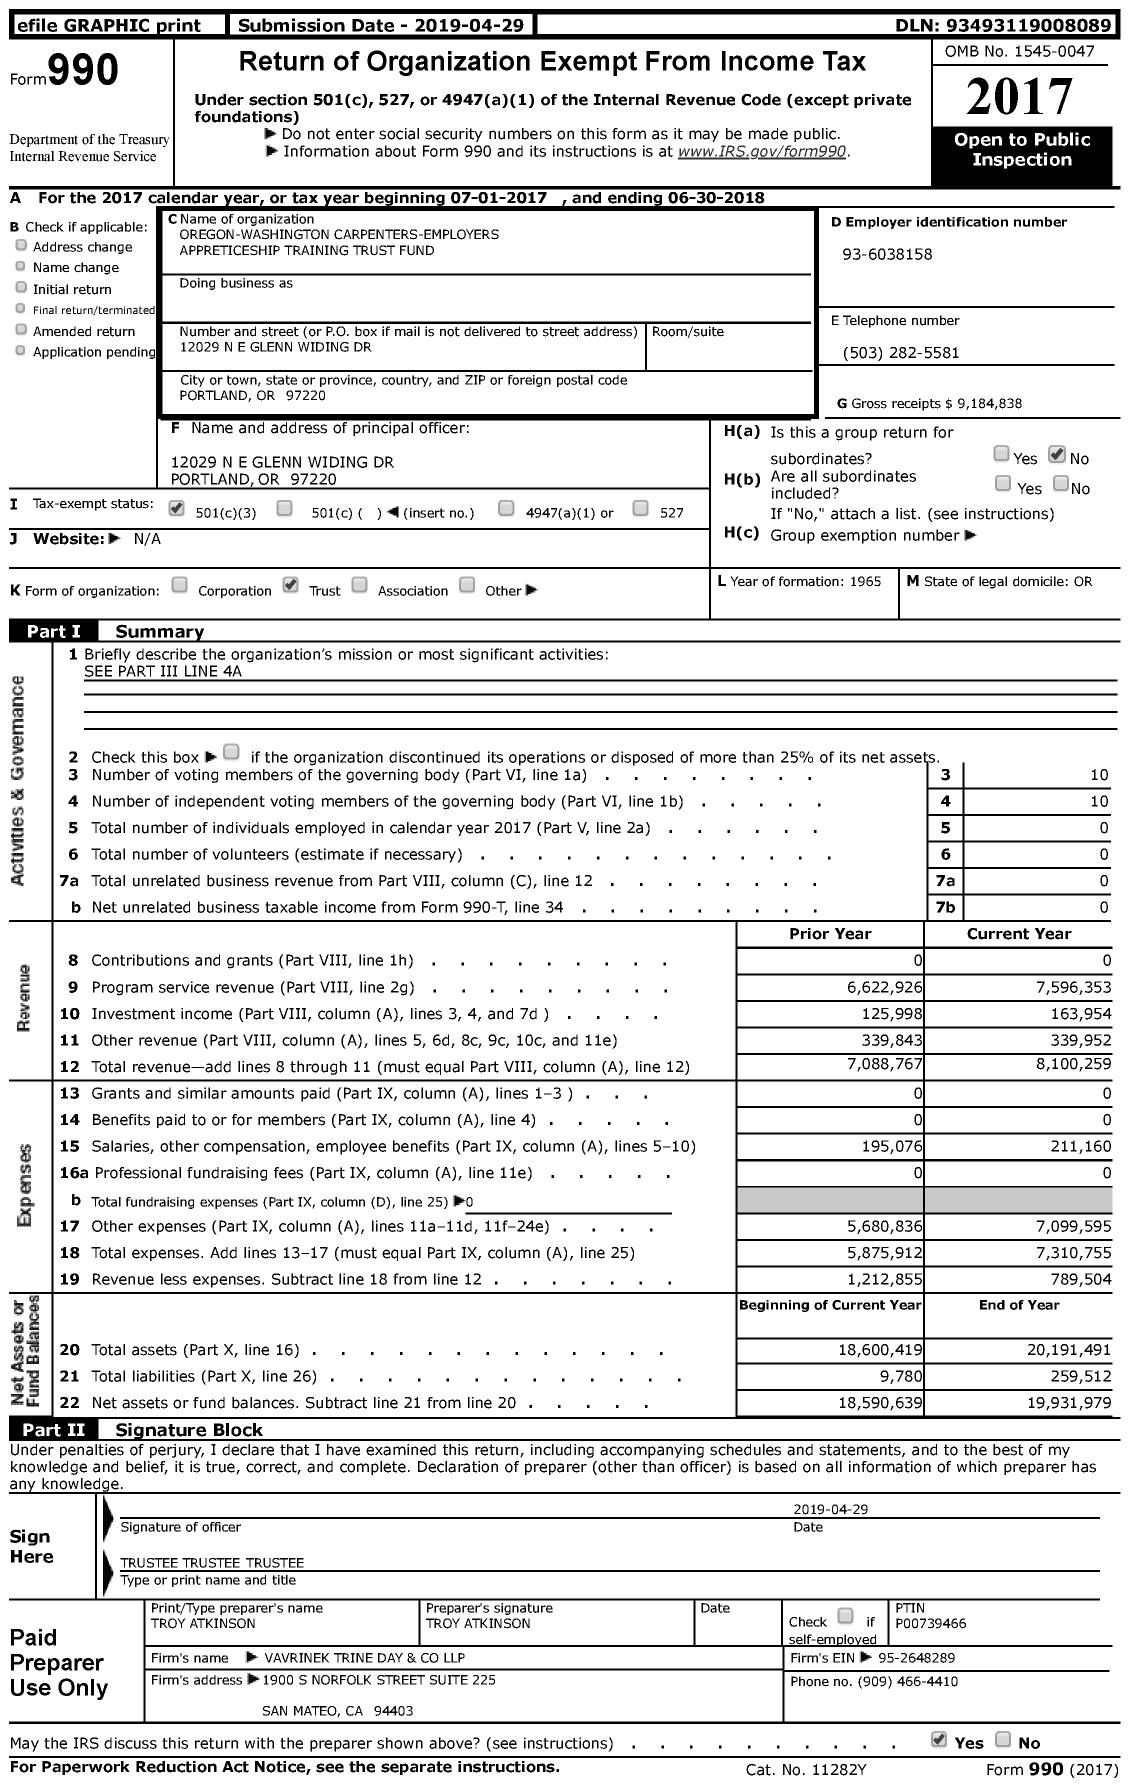 Image of first page of 2017 Form 990 for Oregon-Washington Carpenters-Employers Apprenticeship Training Trust Fund